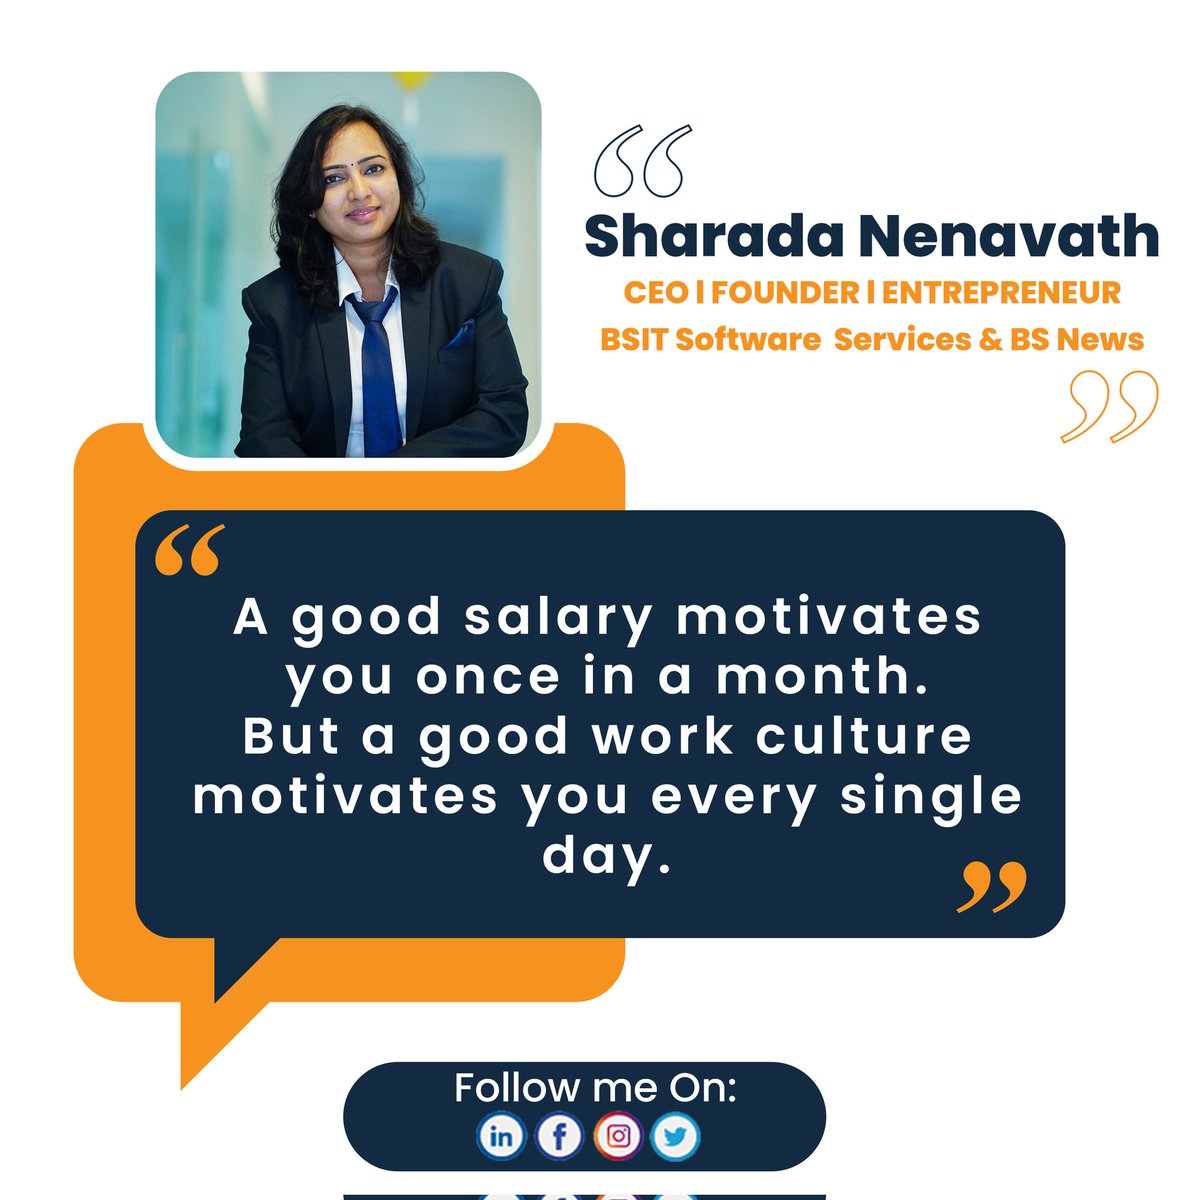 A good salary motivates you once in a month.
But a good work culture motivates you every single day.

#bhanuchandargarigela #bsitsoftware #bsit #bsitsoftwareservices #BSITSoftware #BSITSoftwarePrivateLimited #BSIT #BeAtBSIT #BSITSoftwareServices #India #Qoute #Motivational